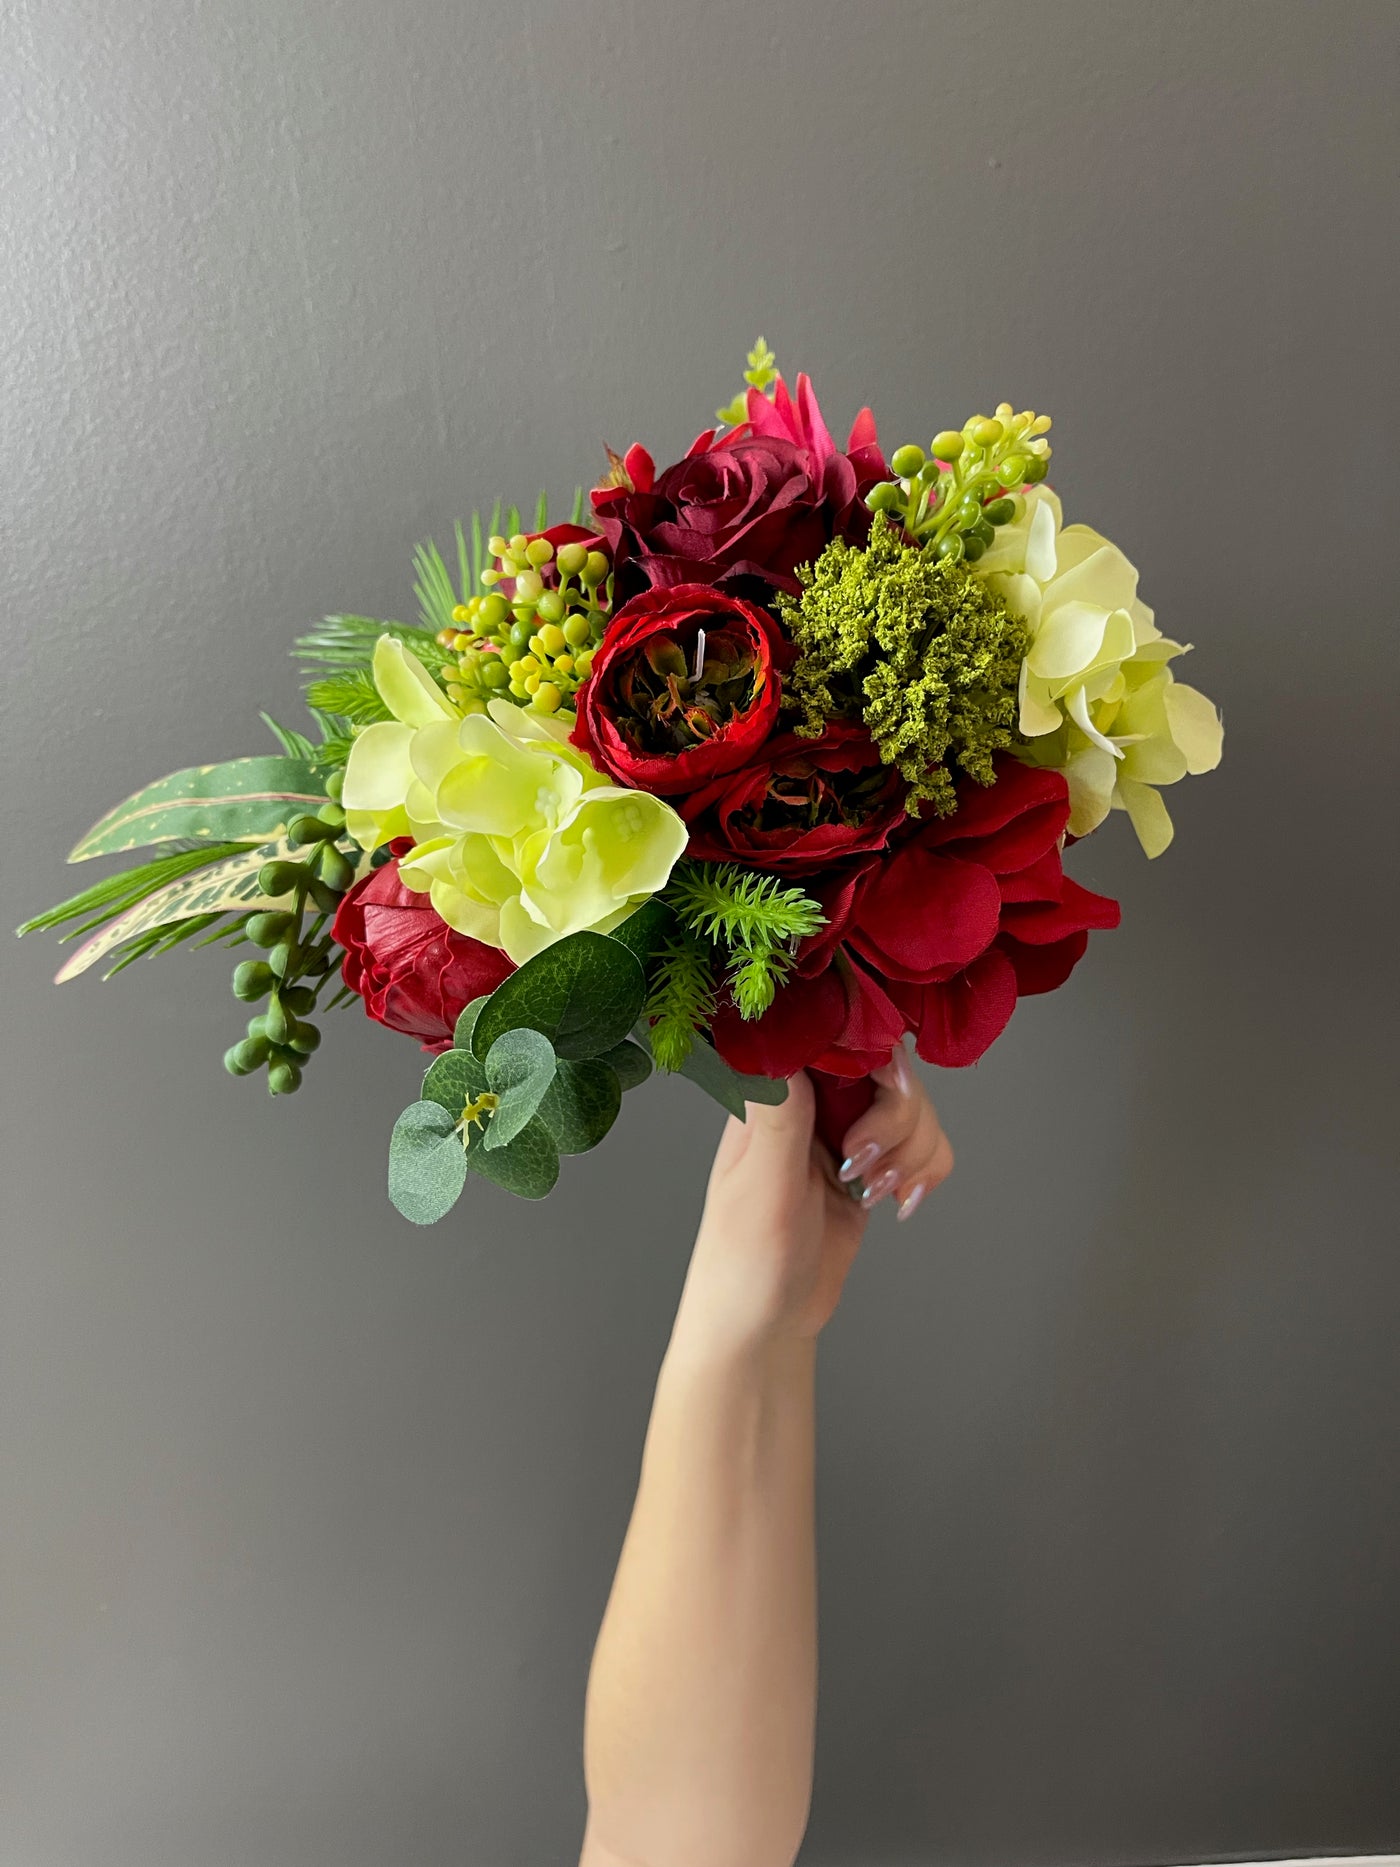 Rent  A Rose- Flower Girl Bouquet- Scarlet and olive green. Rent for five days for $35.00